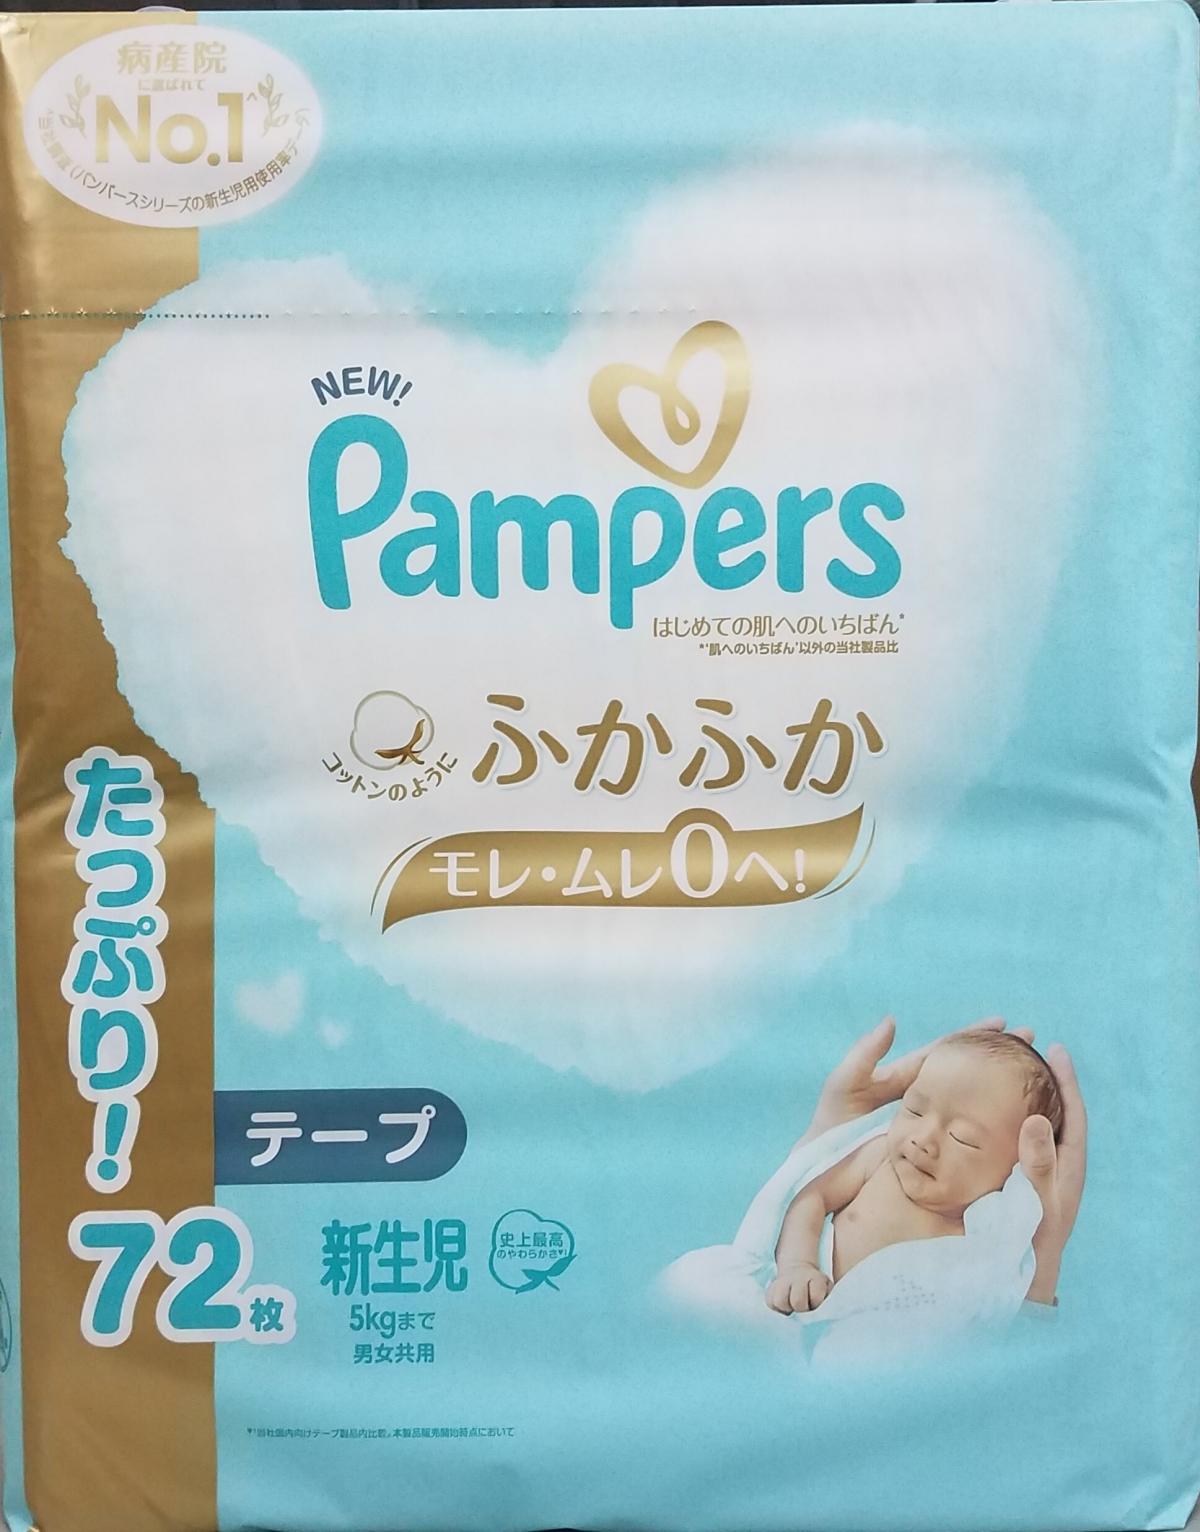 [Full Case] Ichiban Diapers NB72 x3packs (New Packing) (Parallel Import)